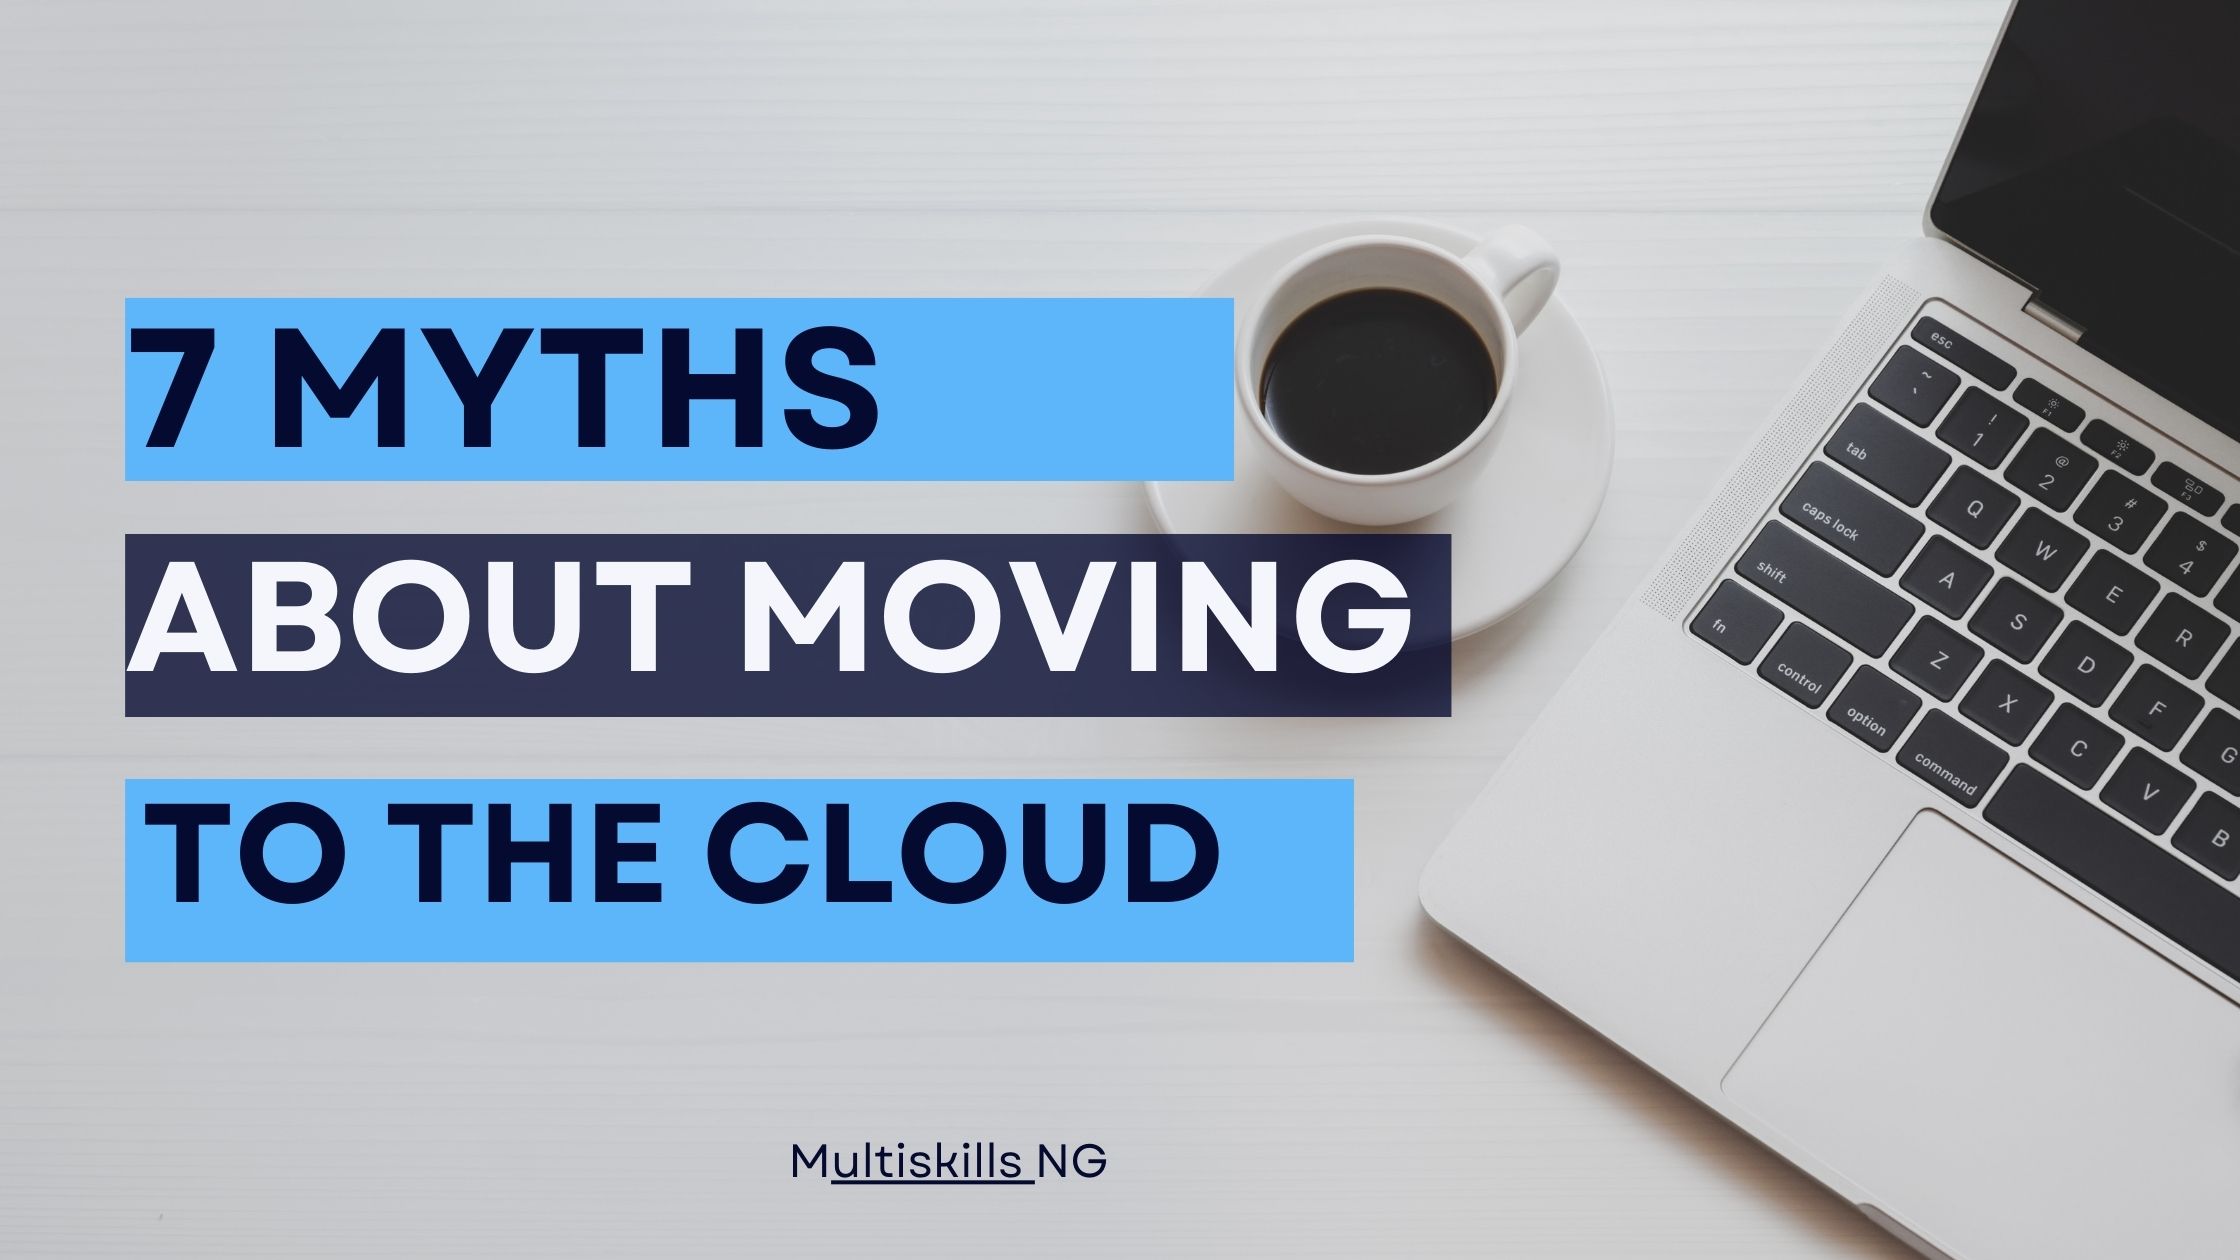 Why move to the cloud